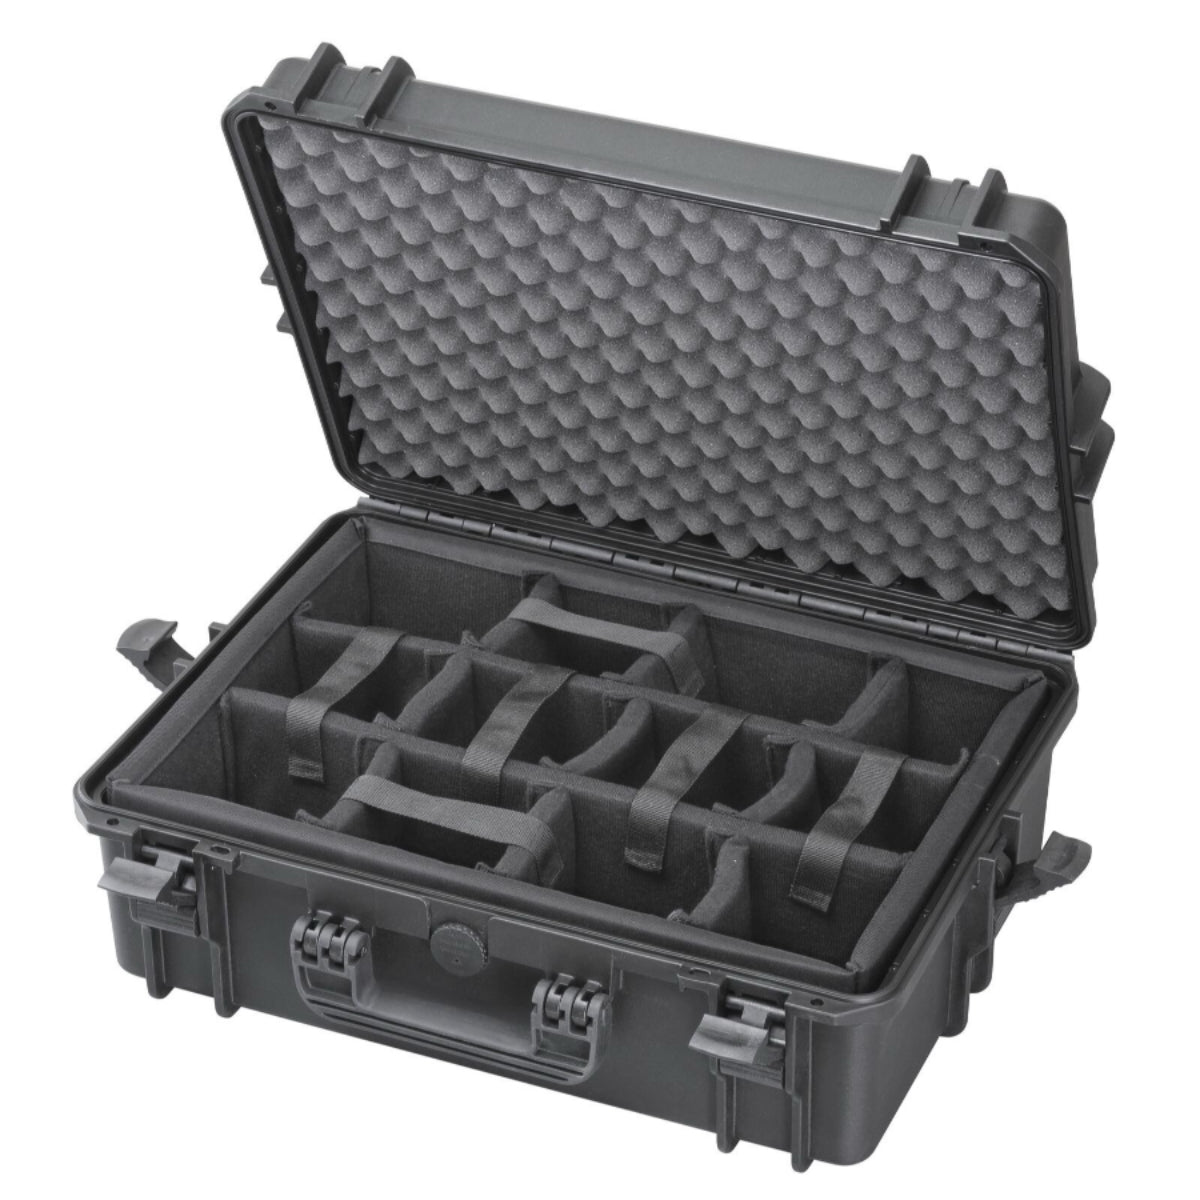 SP PRO 505CAMTR Black Trolley Case, Padded Dividers, ID: L500xW350xH194mm